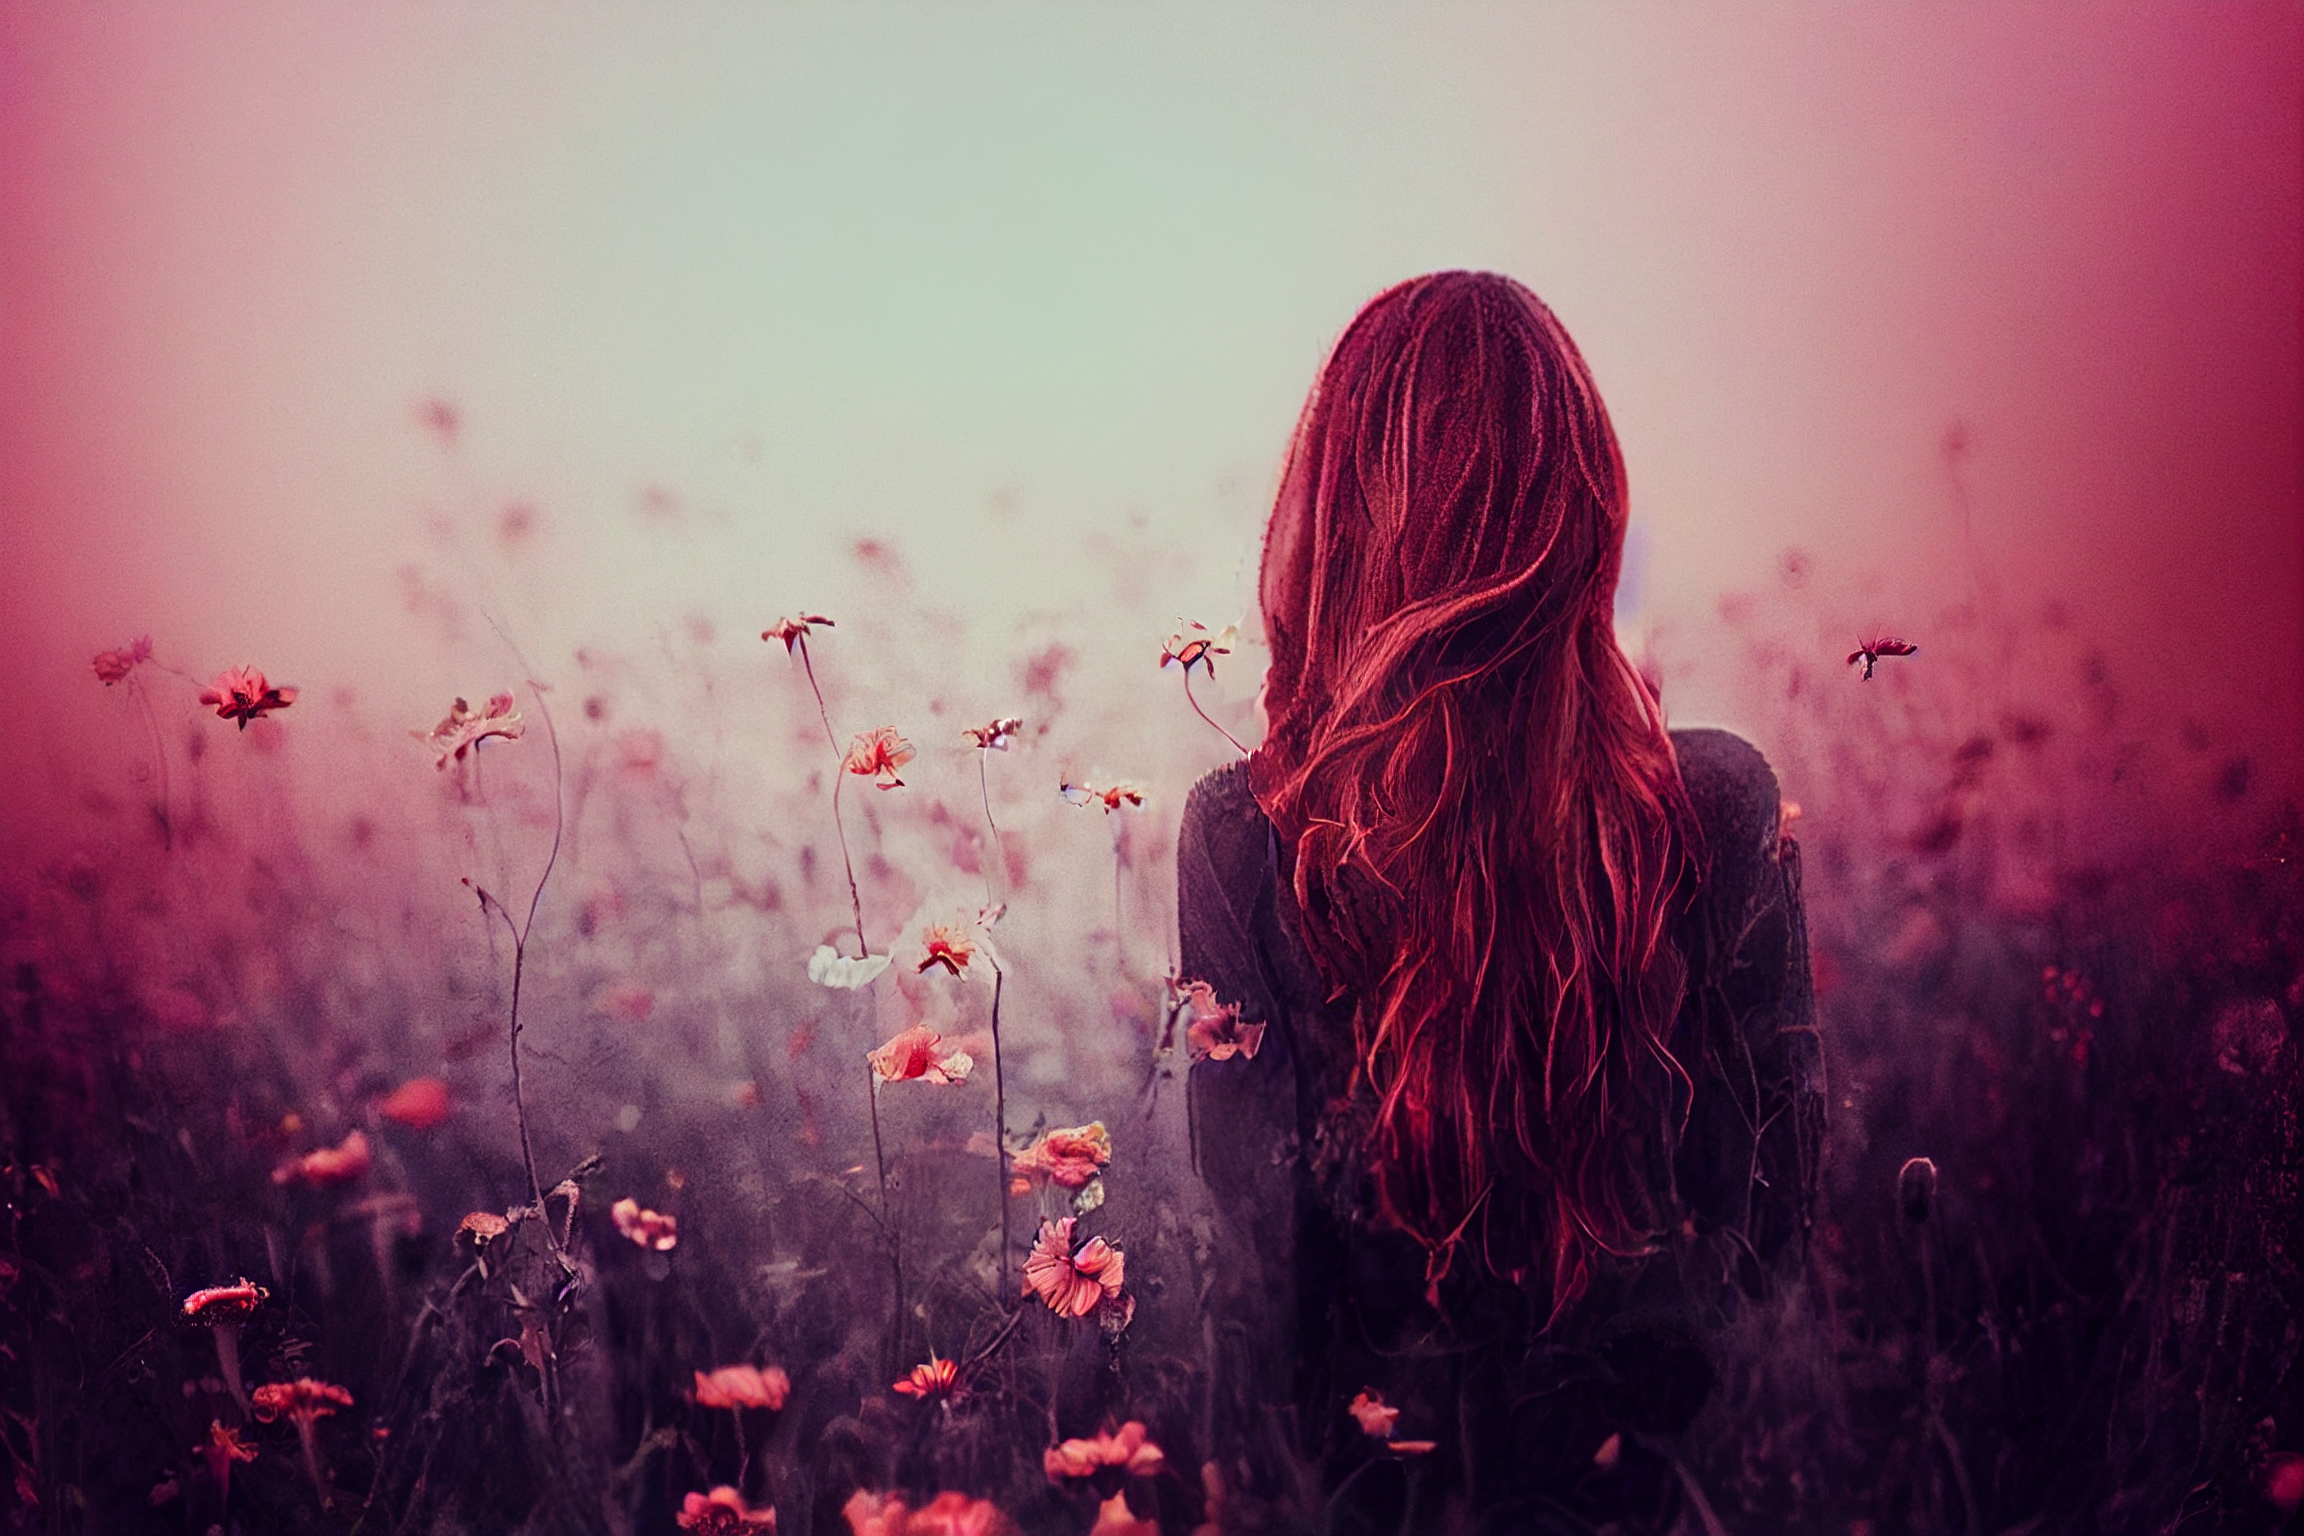 And where I’ll go in life still nobody knows – Red hair and flowes